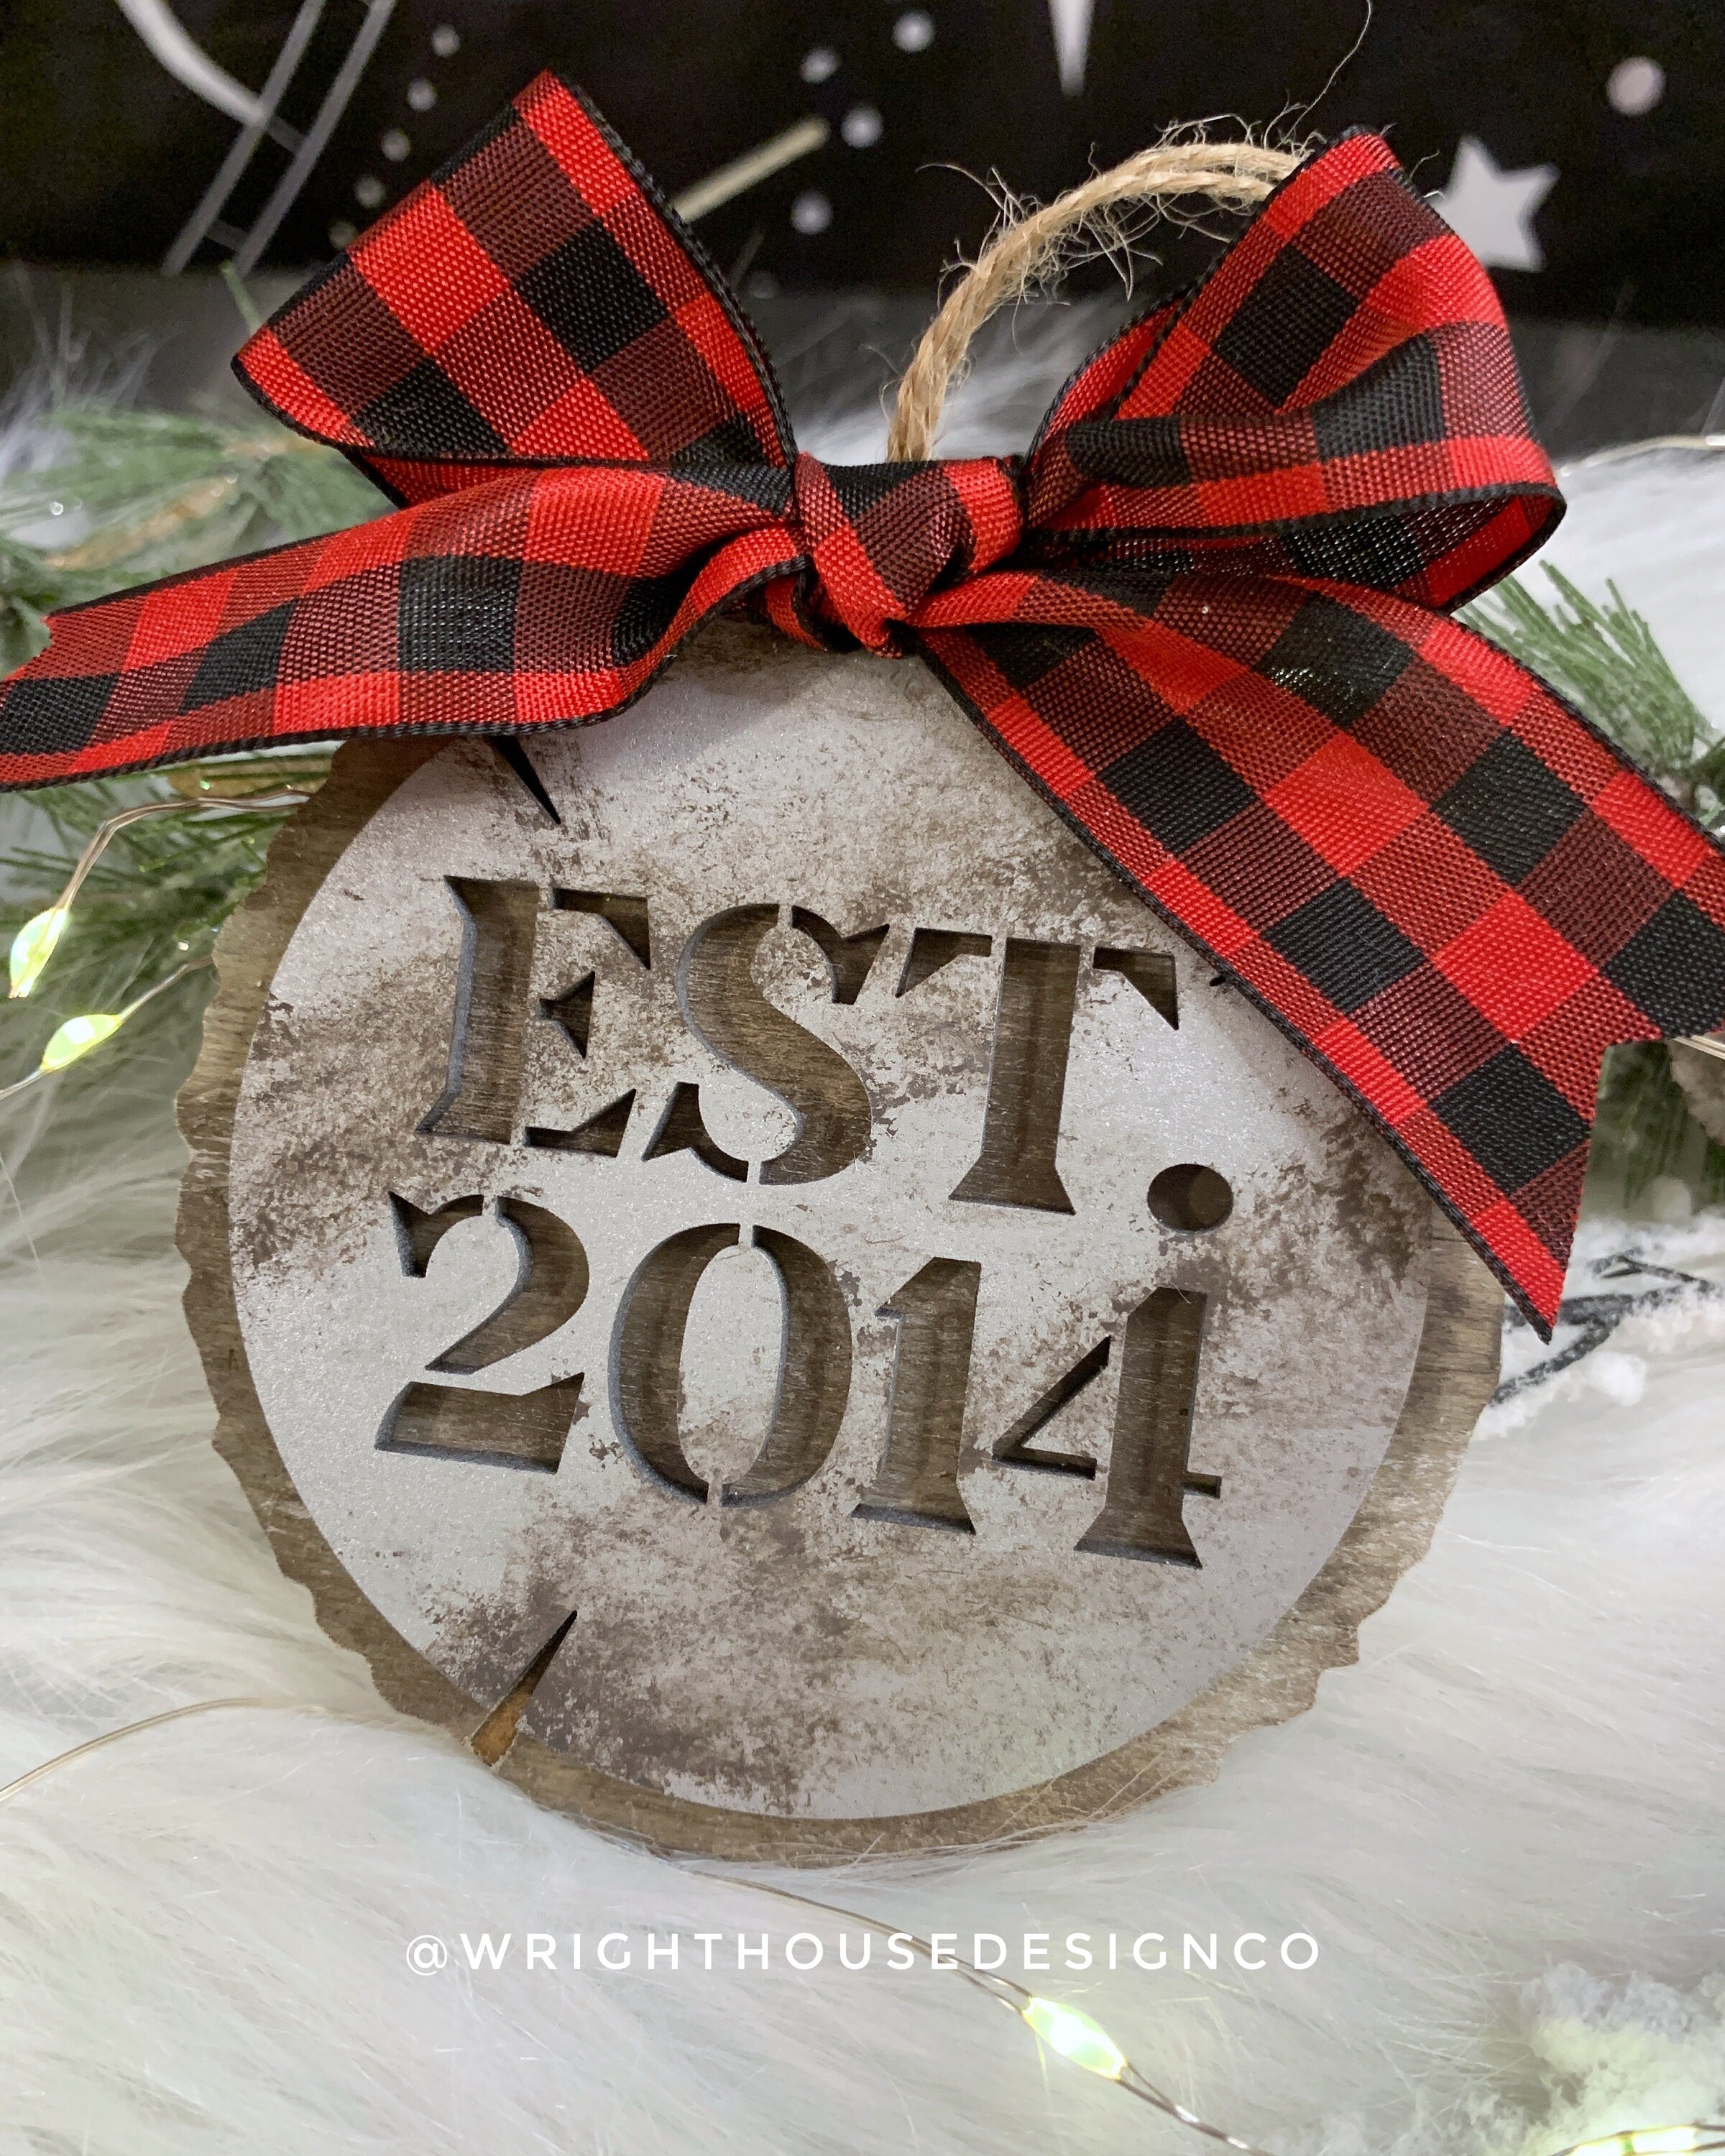 Rustic Galvanized Cookie Tree Ornament - Stencil Established Wood Slice - Ski Lodge Tree Ornament - Year Ornament - Holiday Gift for Couples